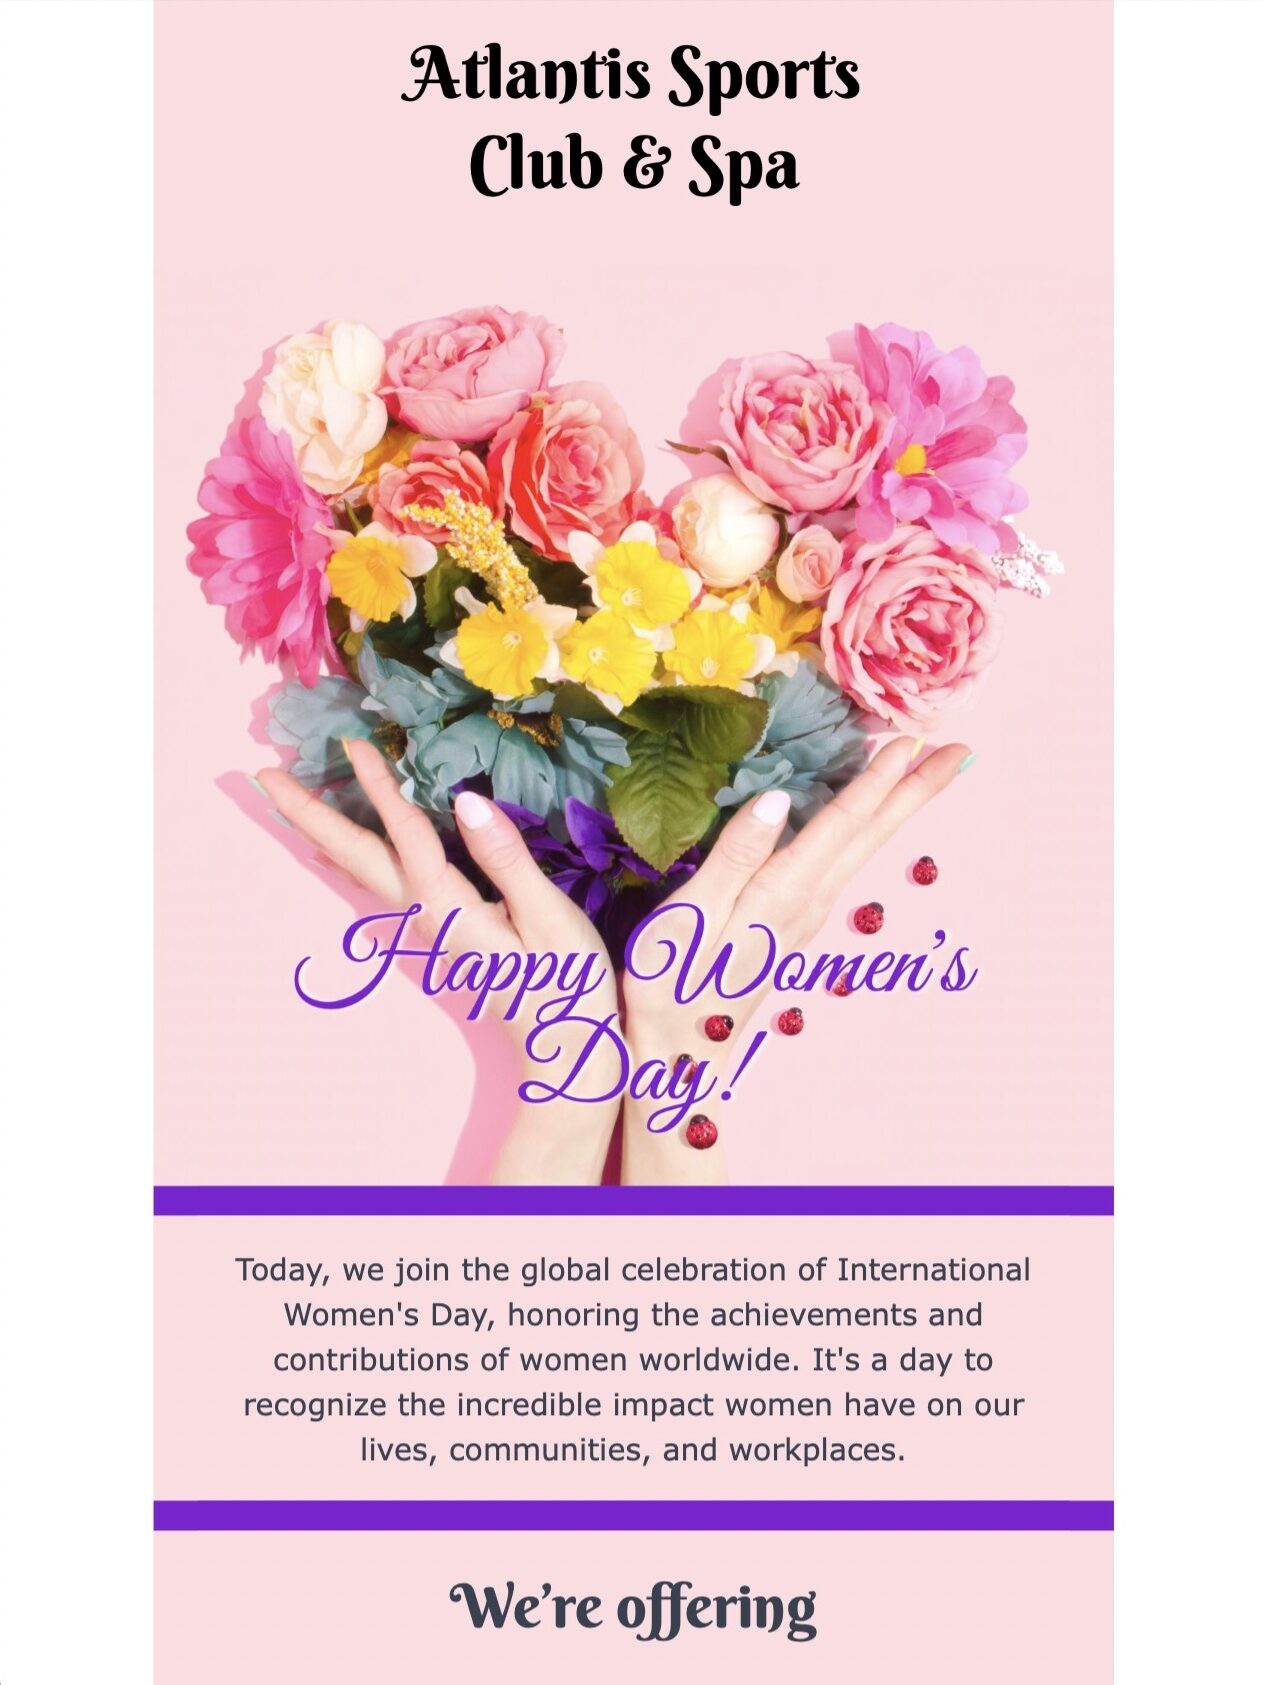 Happy Women's day! Today, we join the global celebration of International Women's Day, honoring the achievements and contributions of women worldwide. It's a day to recognize the incredible impact women have on our lives, communities, and workplaces. We’re offering 40% off all Spa packages Thank you for subscribing to the Atlantis Sports Club & Spa Newsletter.